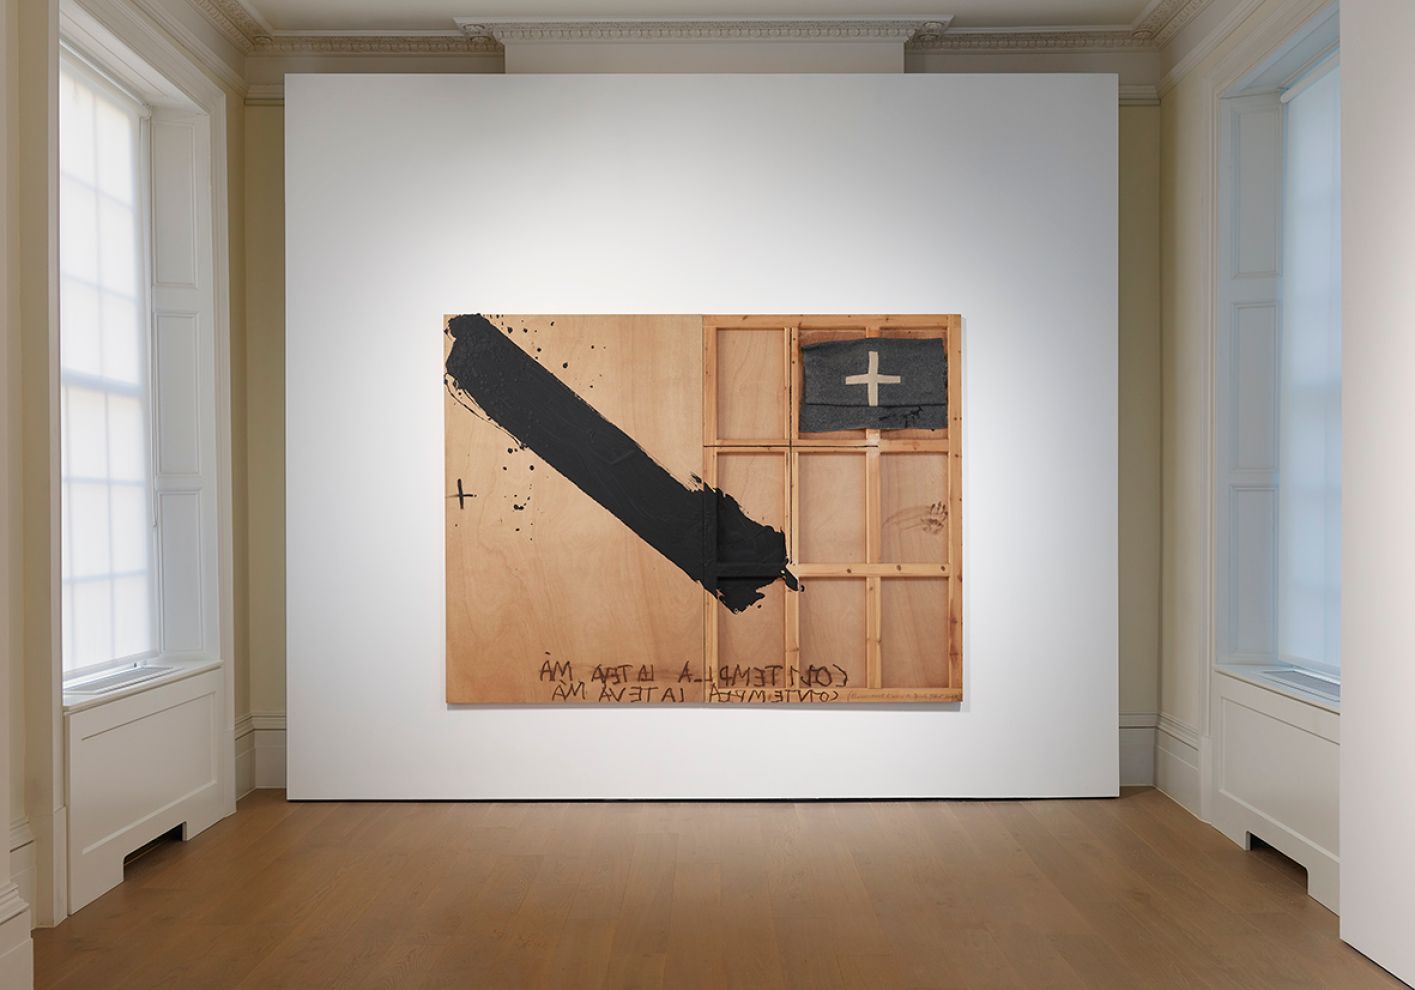 Antoni Tàpies, Recordant, 1999. Paint and assemblage on wood 195 x 260 cm